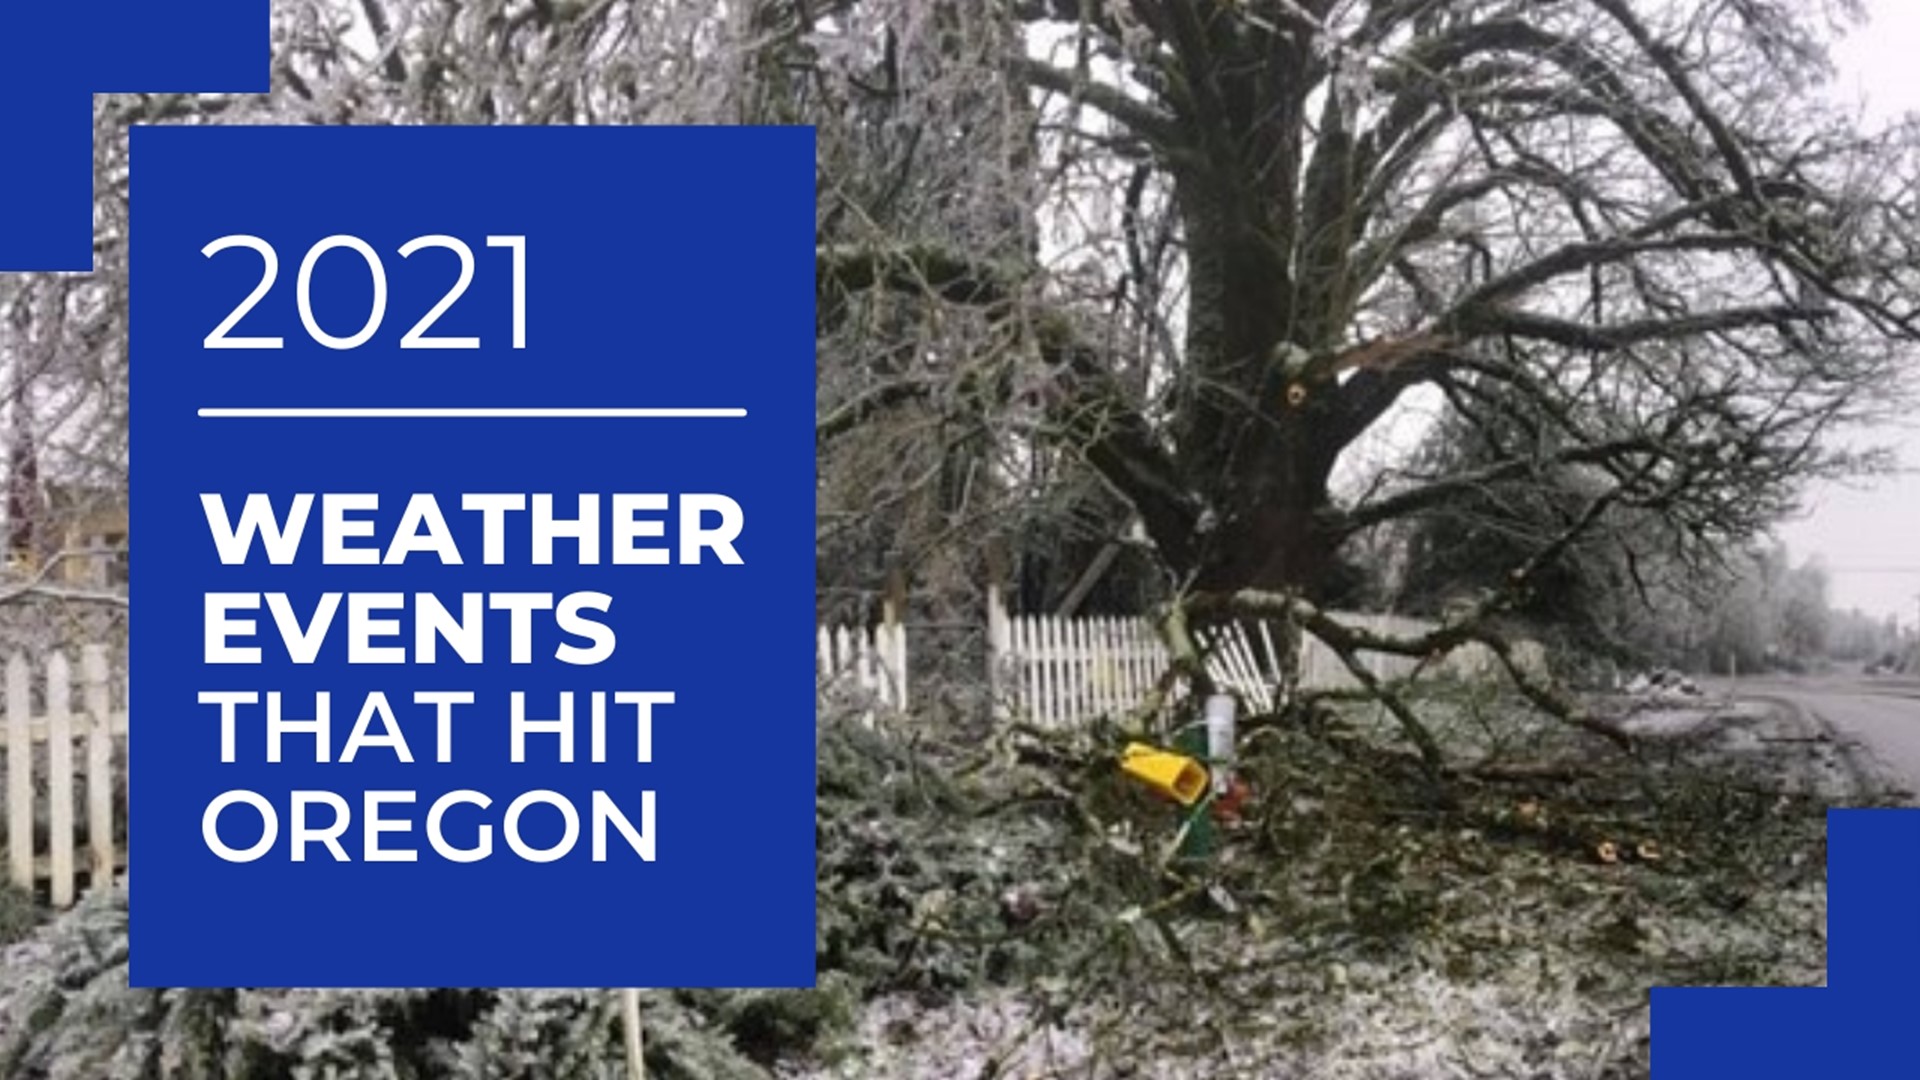 KGW's most-watched and most-read weather stories of 2021 were all related to five extreme weather events.